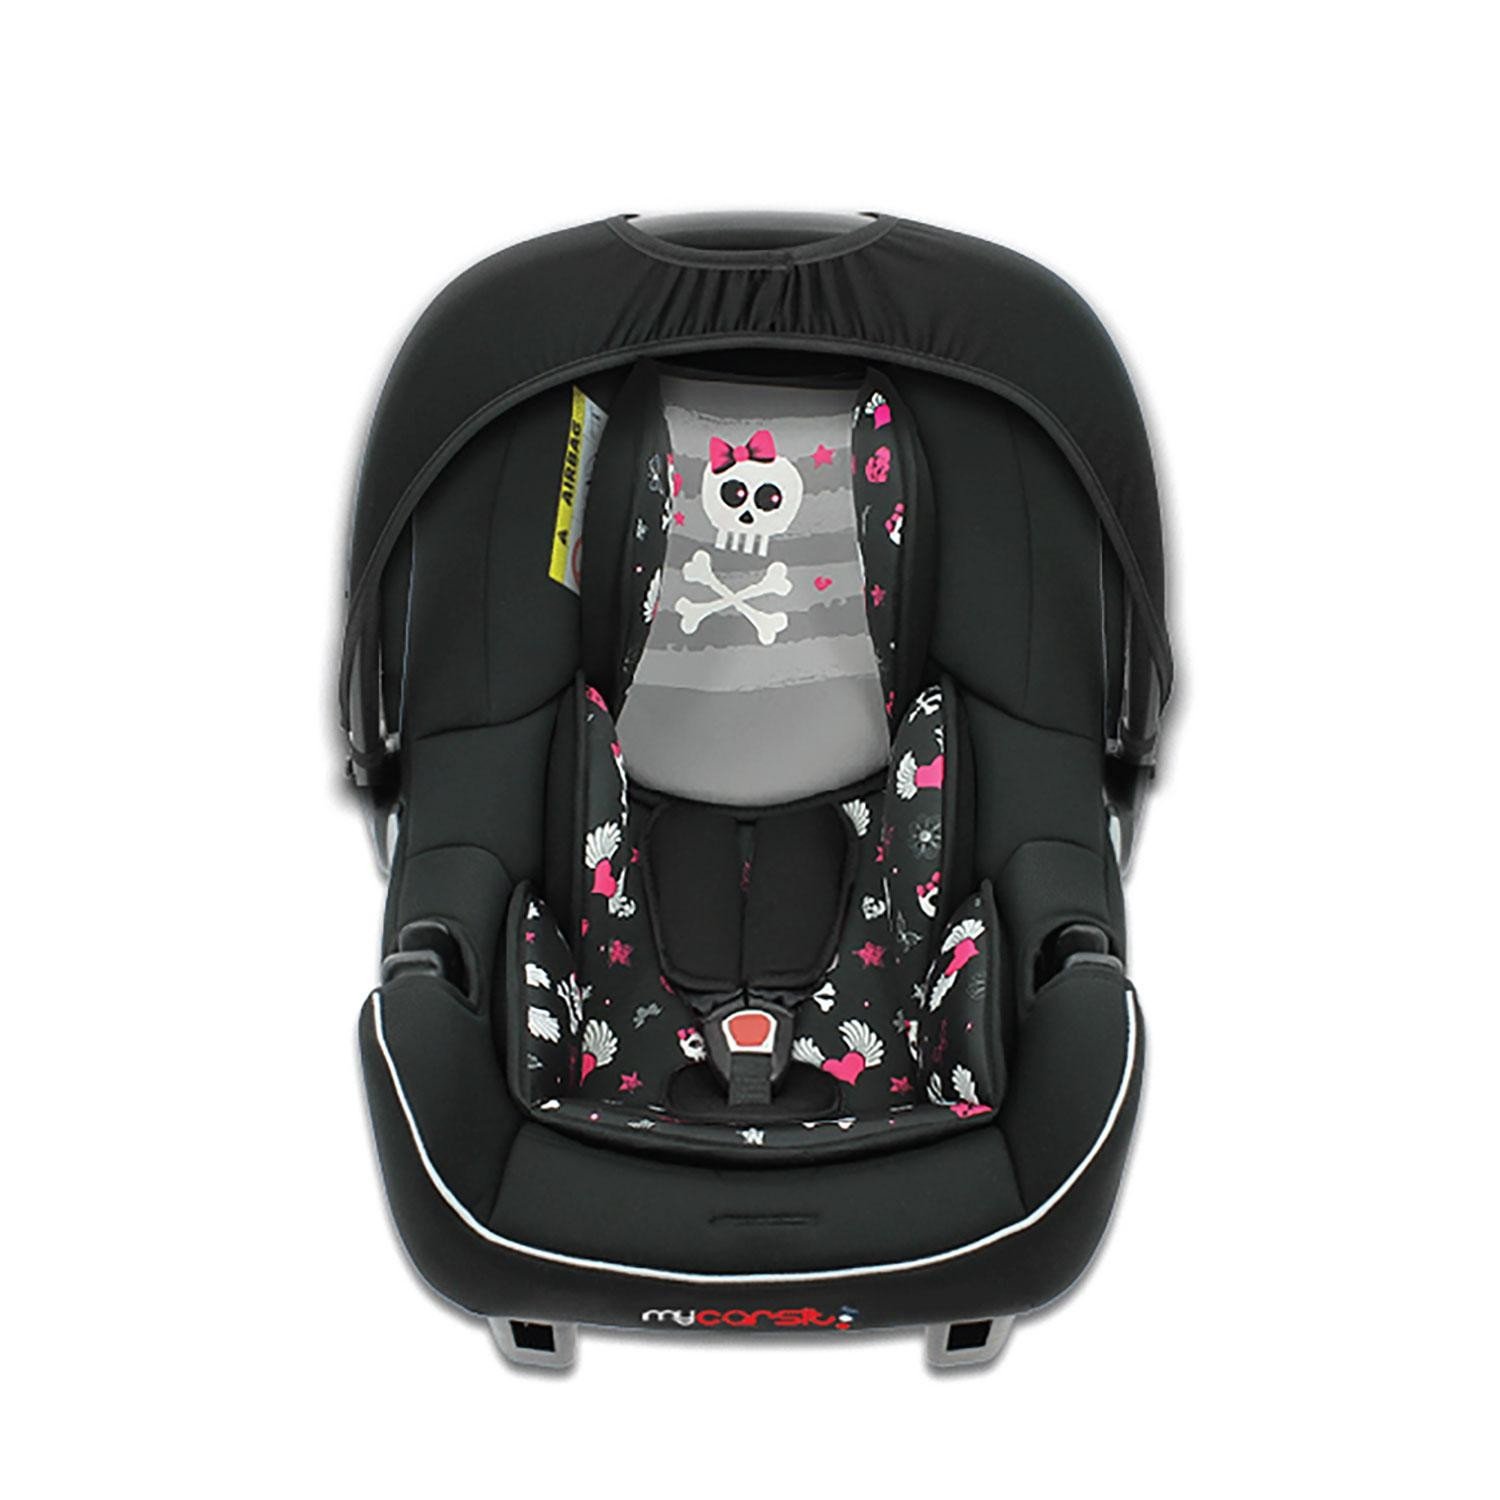 Mycarsit Uno – Baby Car Seat ECE Group 0 + (0 to 13 kg)